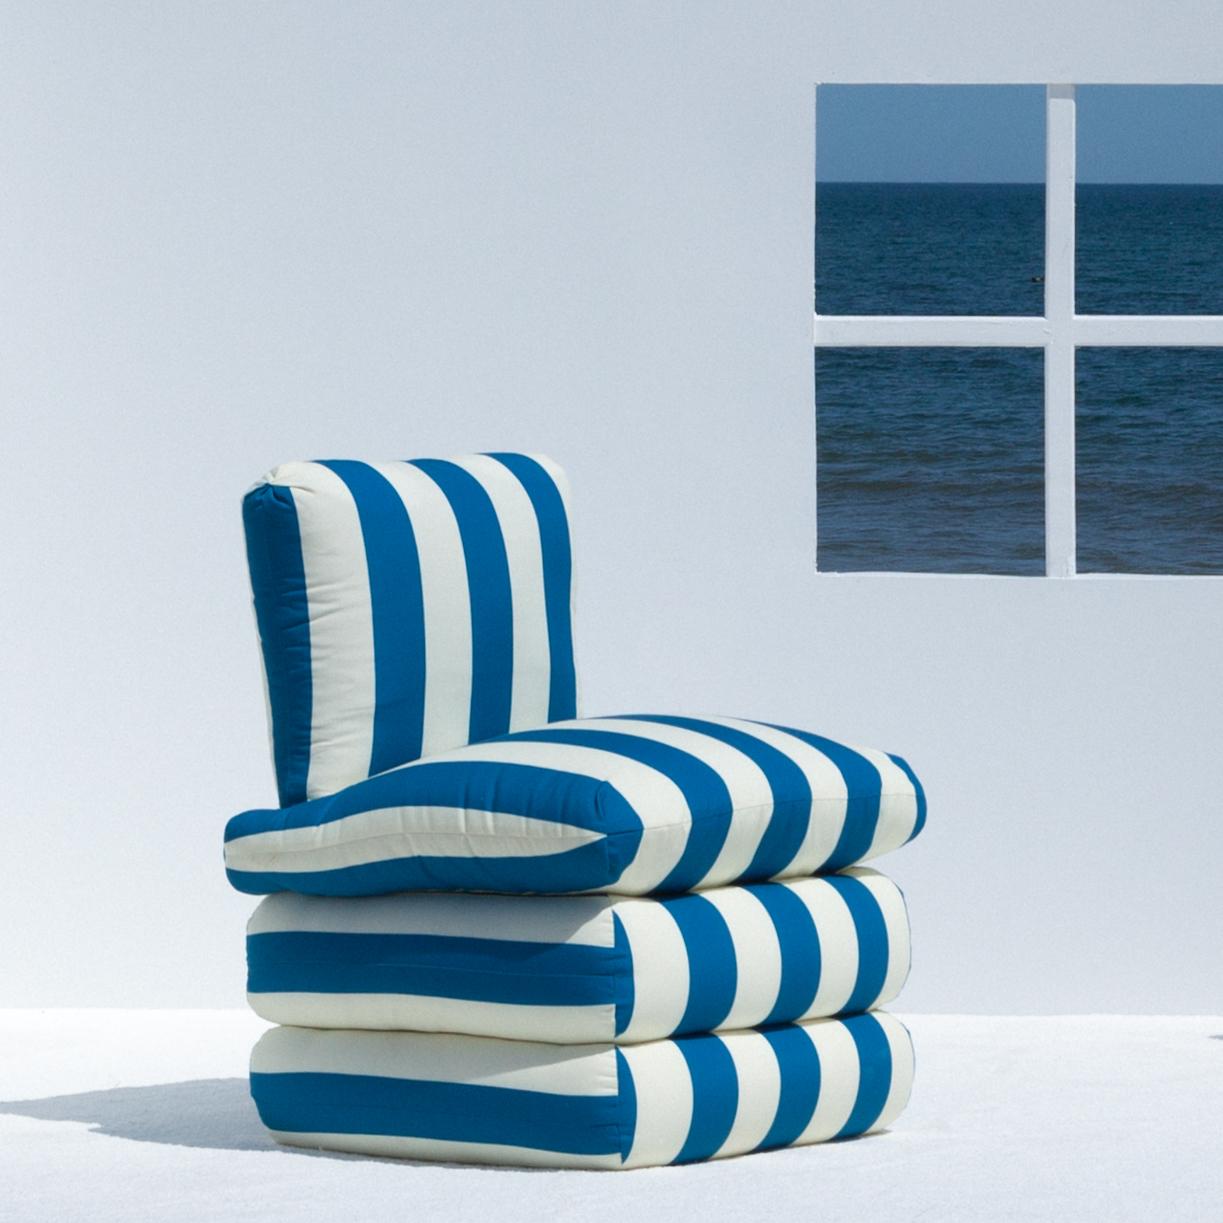 Inspired by the relaxed glamour of the 1960s Italian Riviera, our new Pillow Chair physically embodies the longing for lazy summer days with a comfortable, fully upholstered chair in colorful and classic stripes. 

The upholstered shape brings to